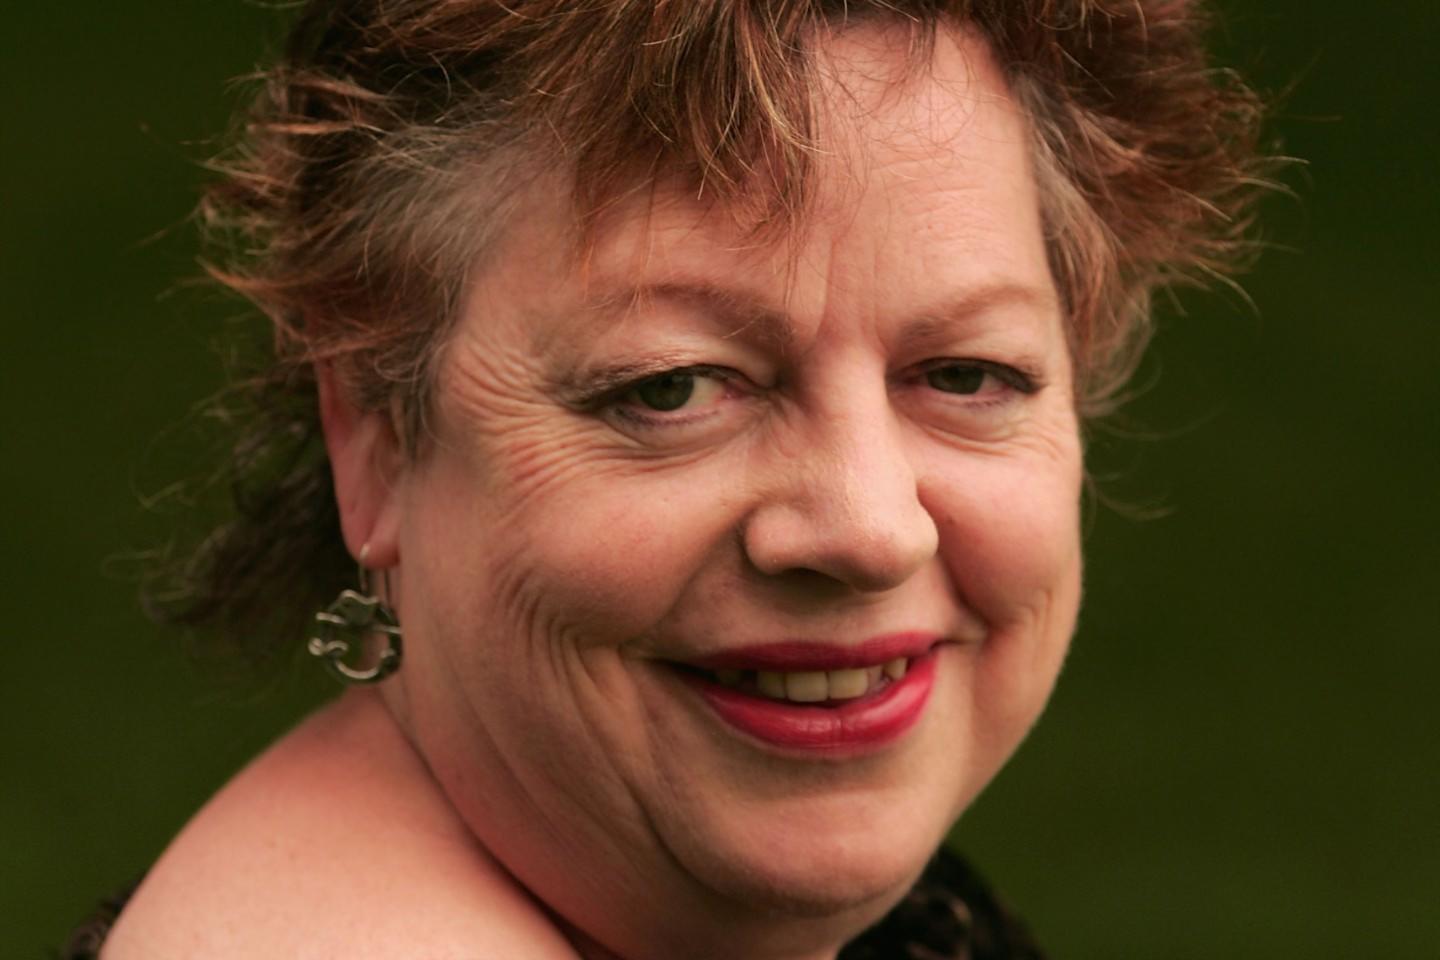 Jo Brand Tickets | Buy or Sell Tickets for Jo Brand Tour Dates - viagogo